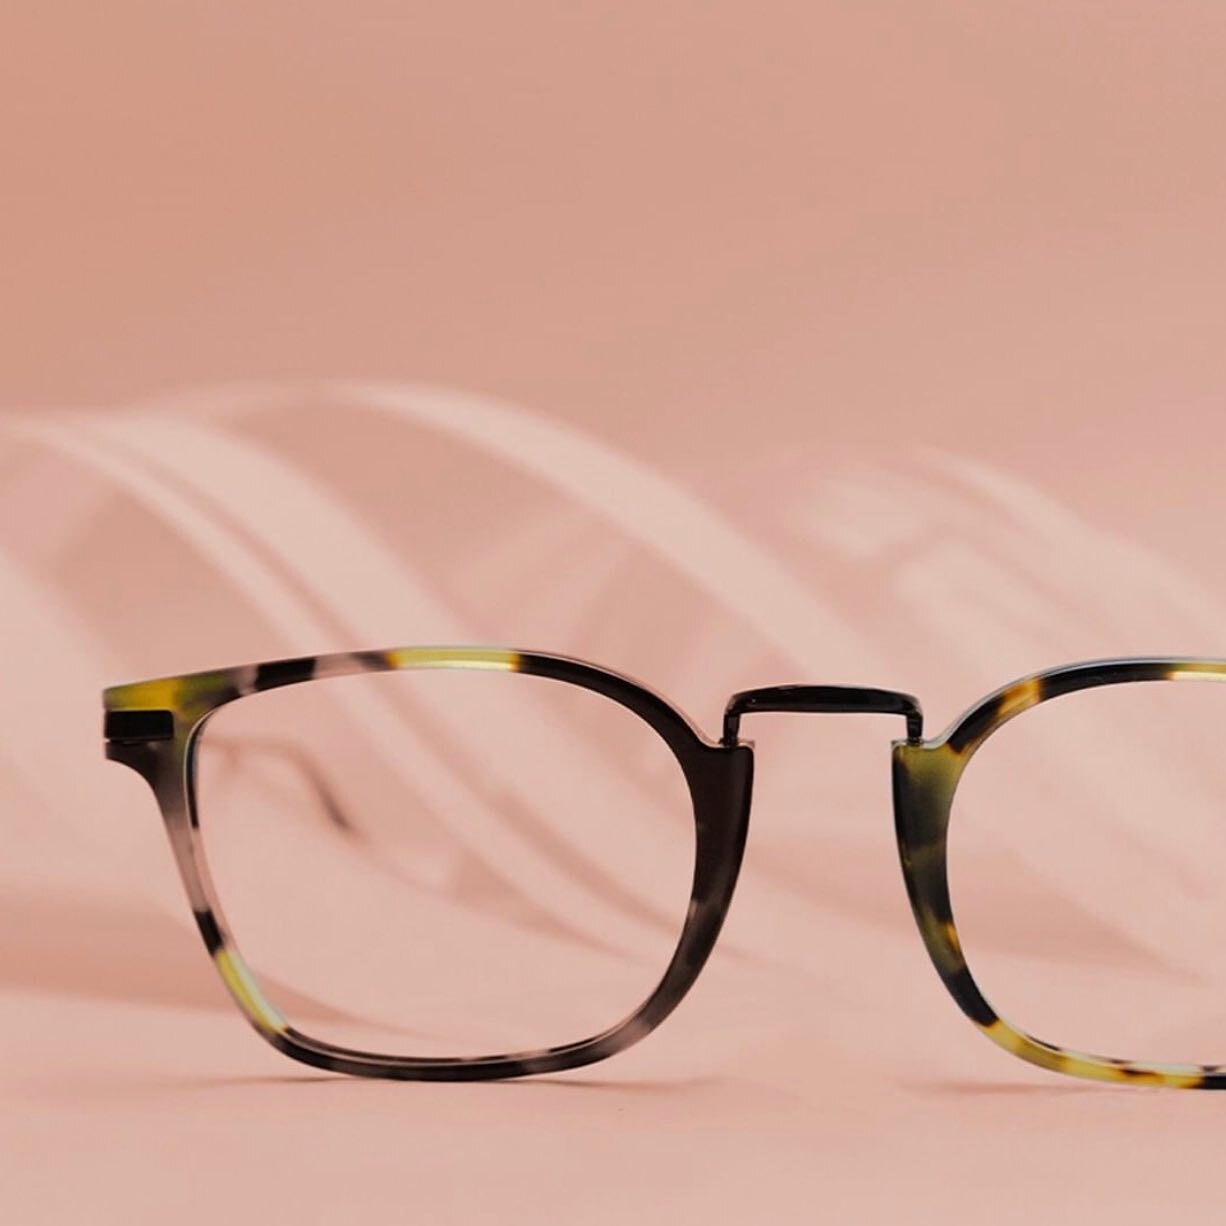 sneak peak of a new brand that landed this week 👀 Any guesses what brand these gorgeous modern classic frames are from?! 
Check out our stories for more details and a few famous faces wearing this new in brand 🙌🏻